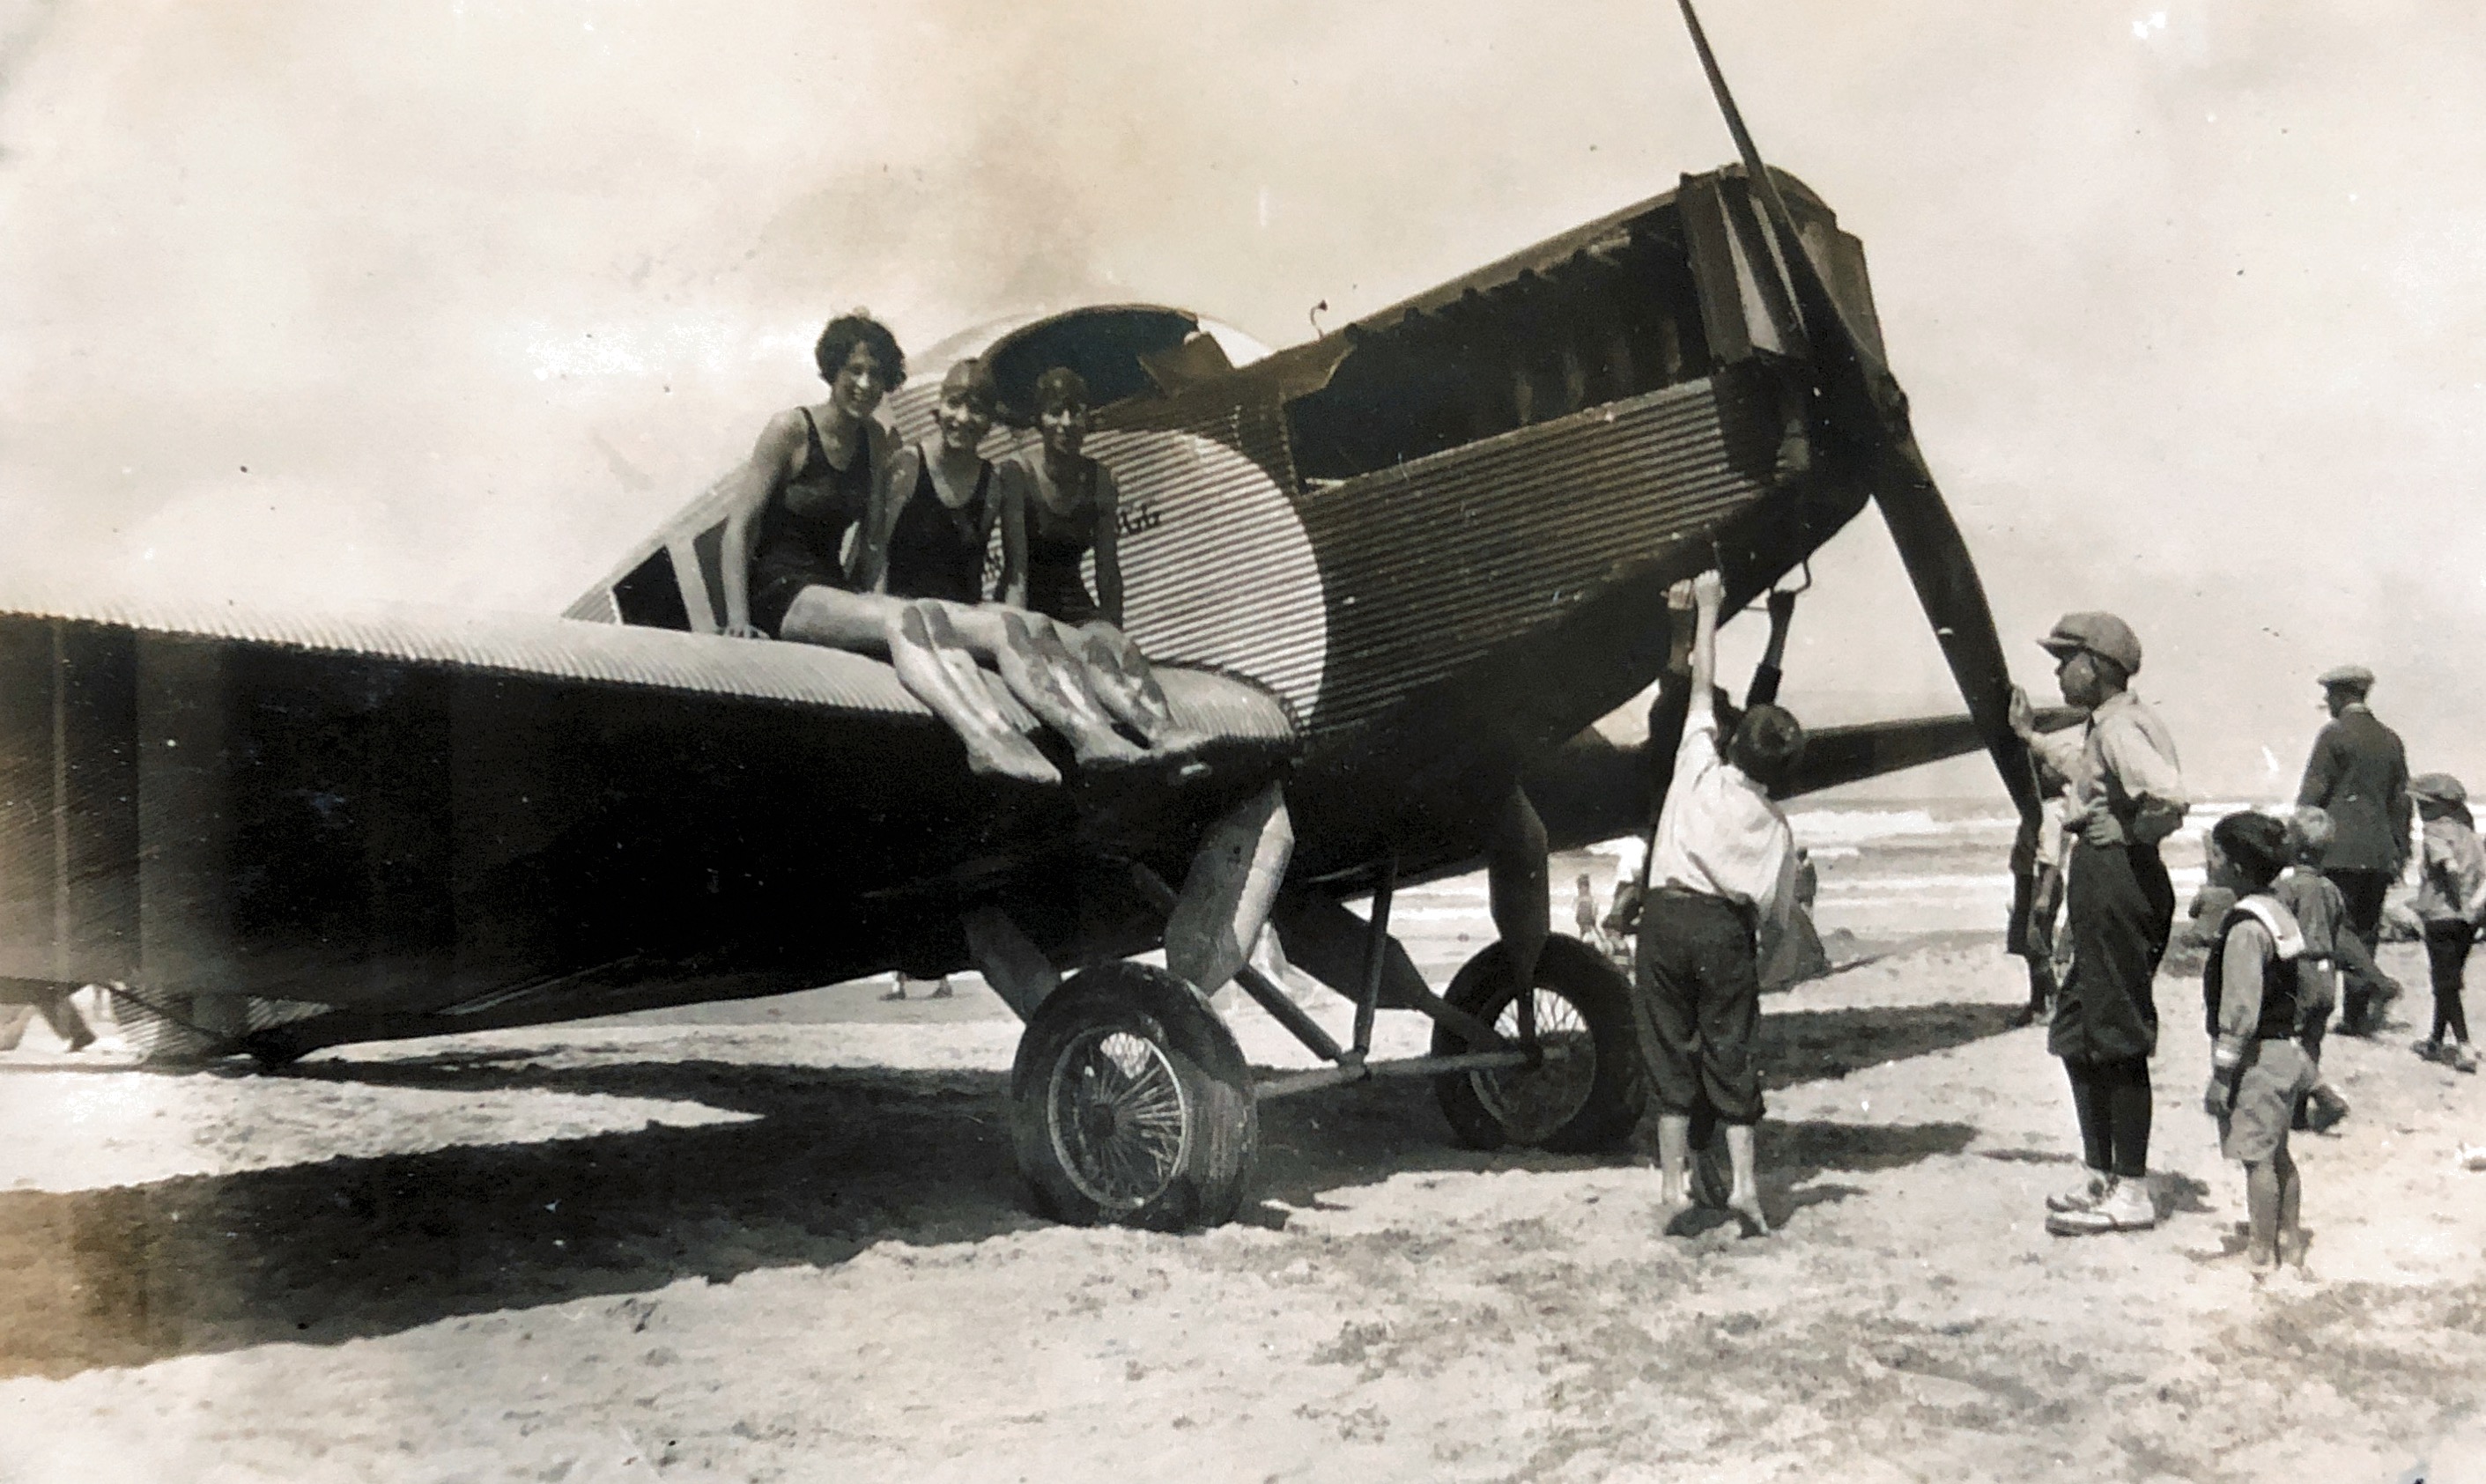 Southern Oregon coast, Marjorie and Friends, checking out the airplane. Abt. 1919